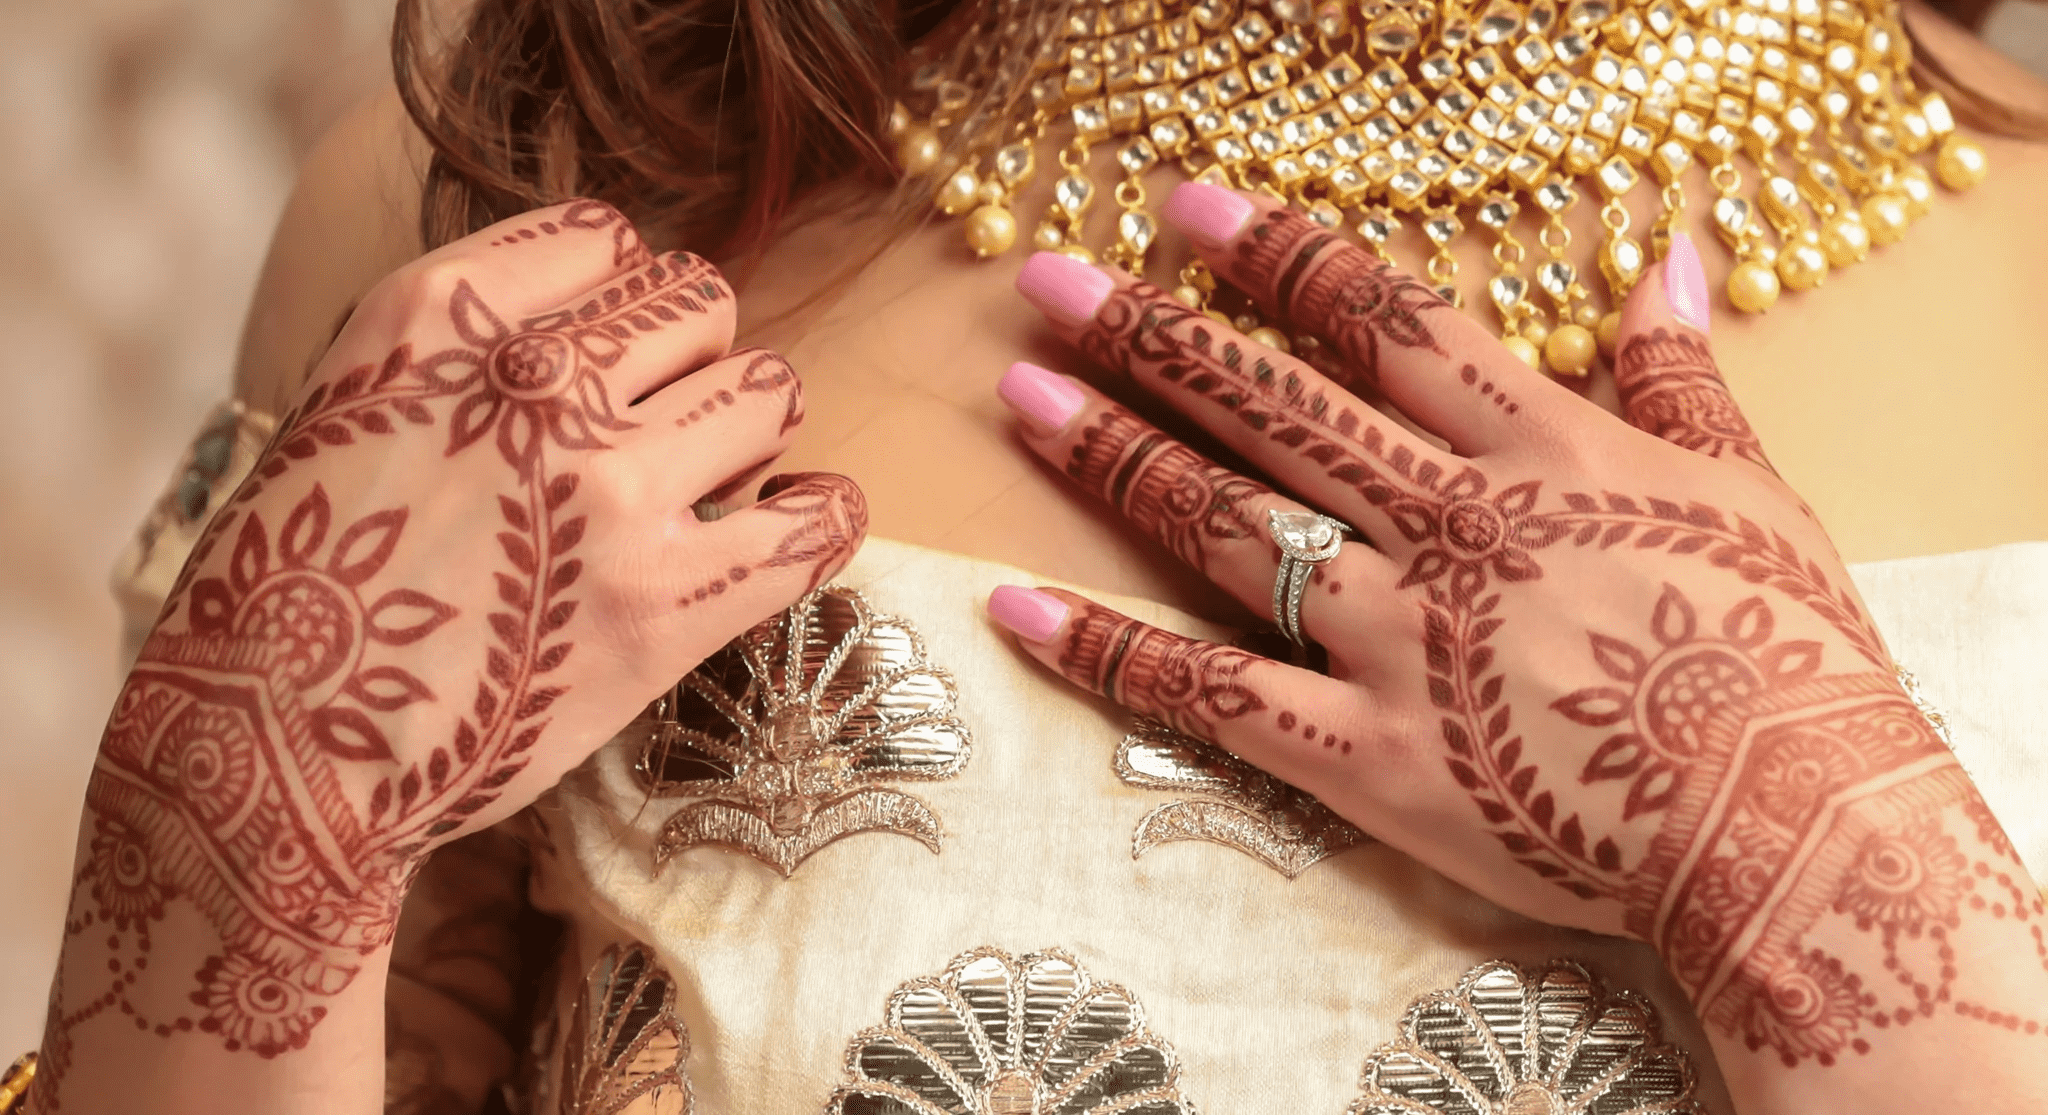 12 Rose Design Mehndi Ideas for the Bride and Her Besties!